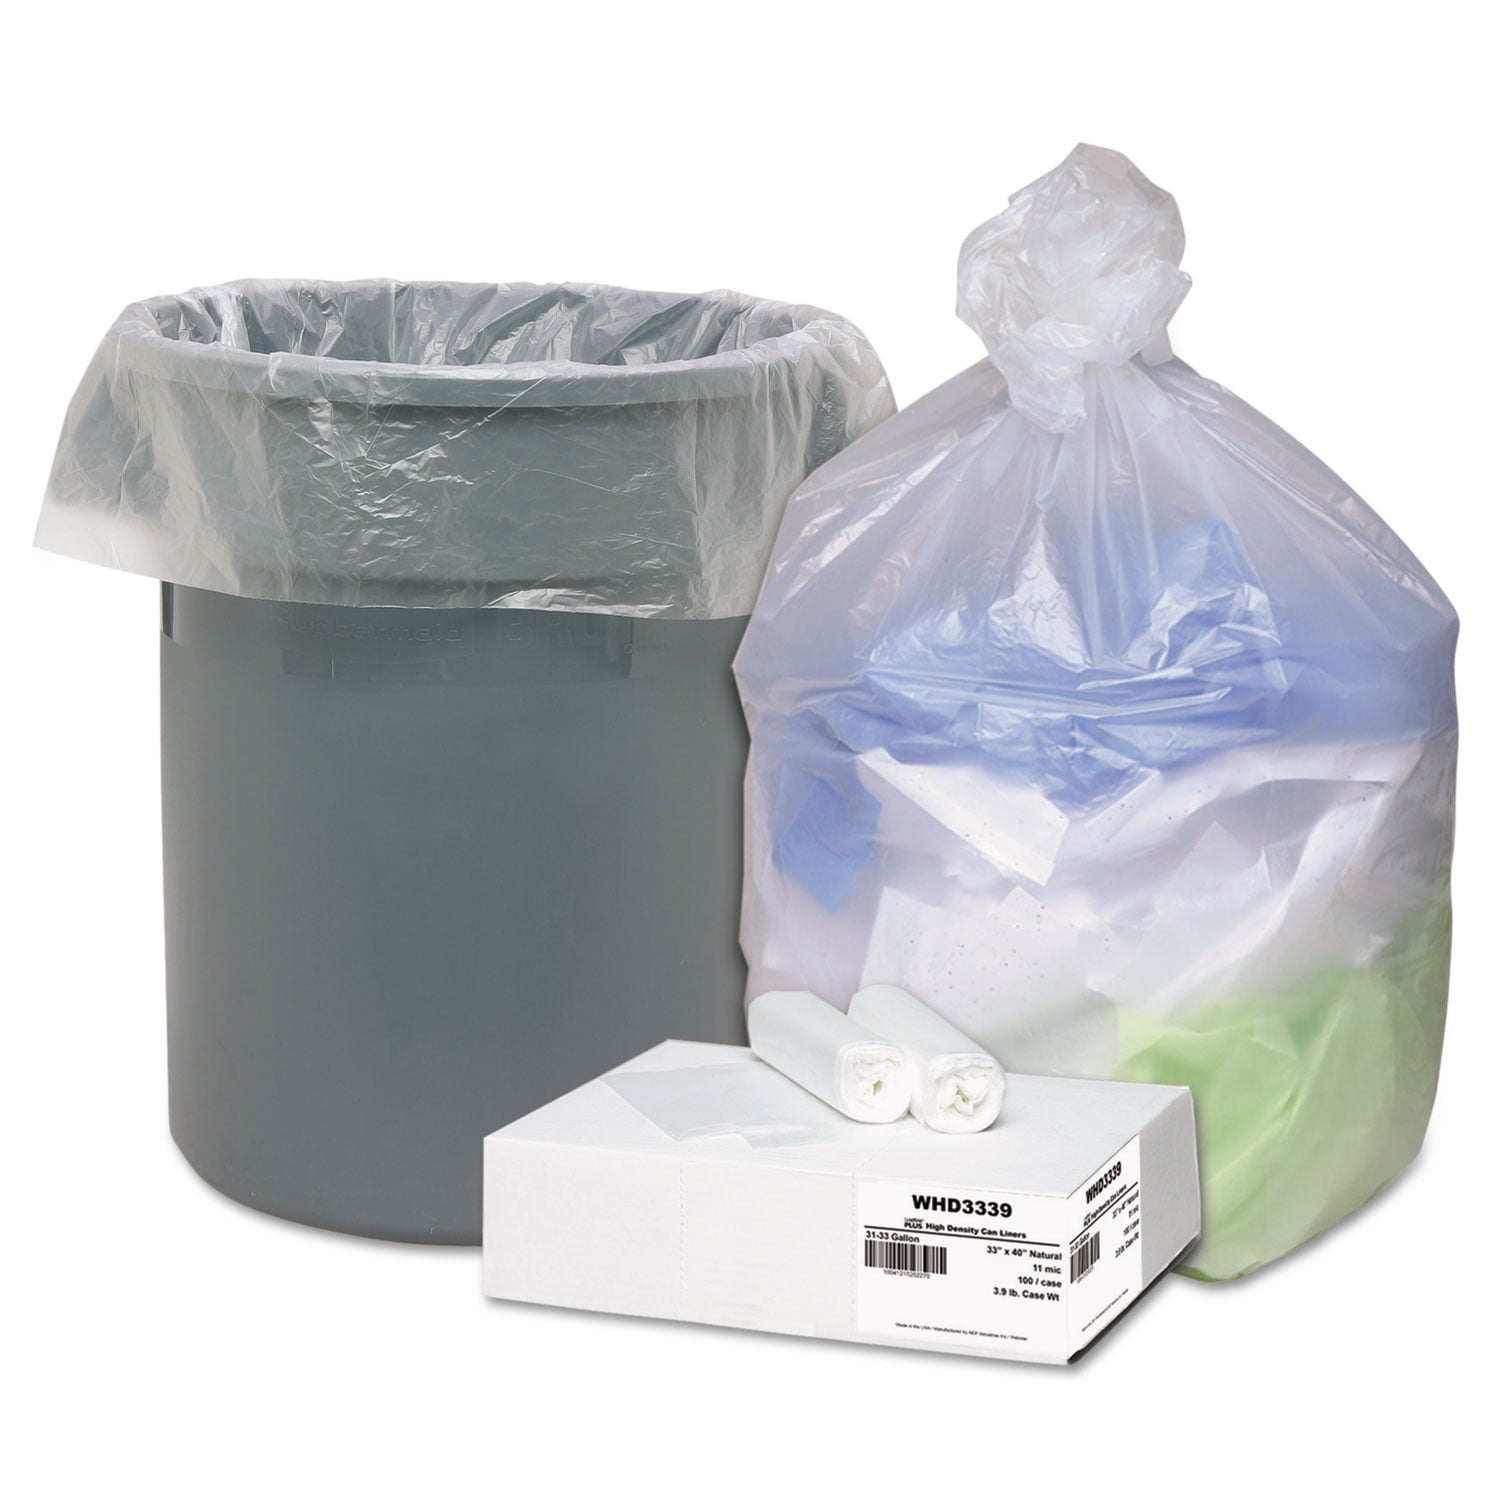 Dropship Pack Of 50 Garbage Can Liners 43 X 48 Ultra Thin Natural